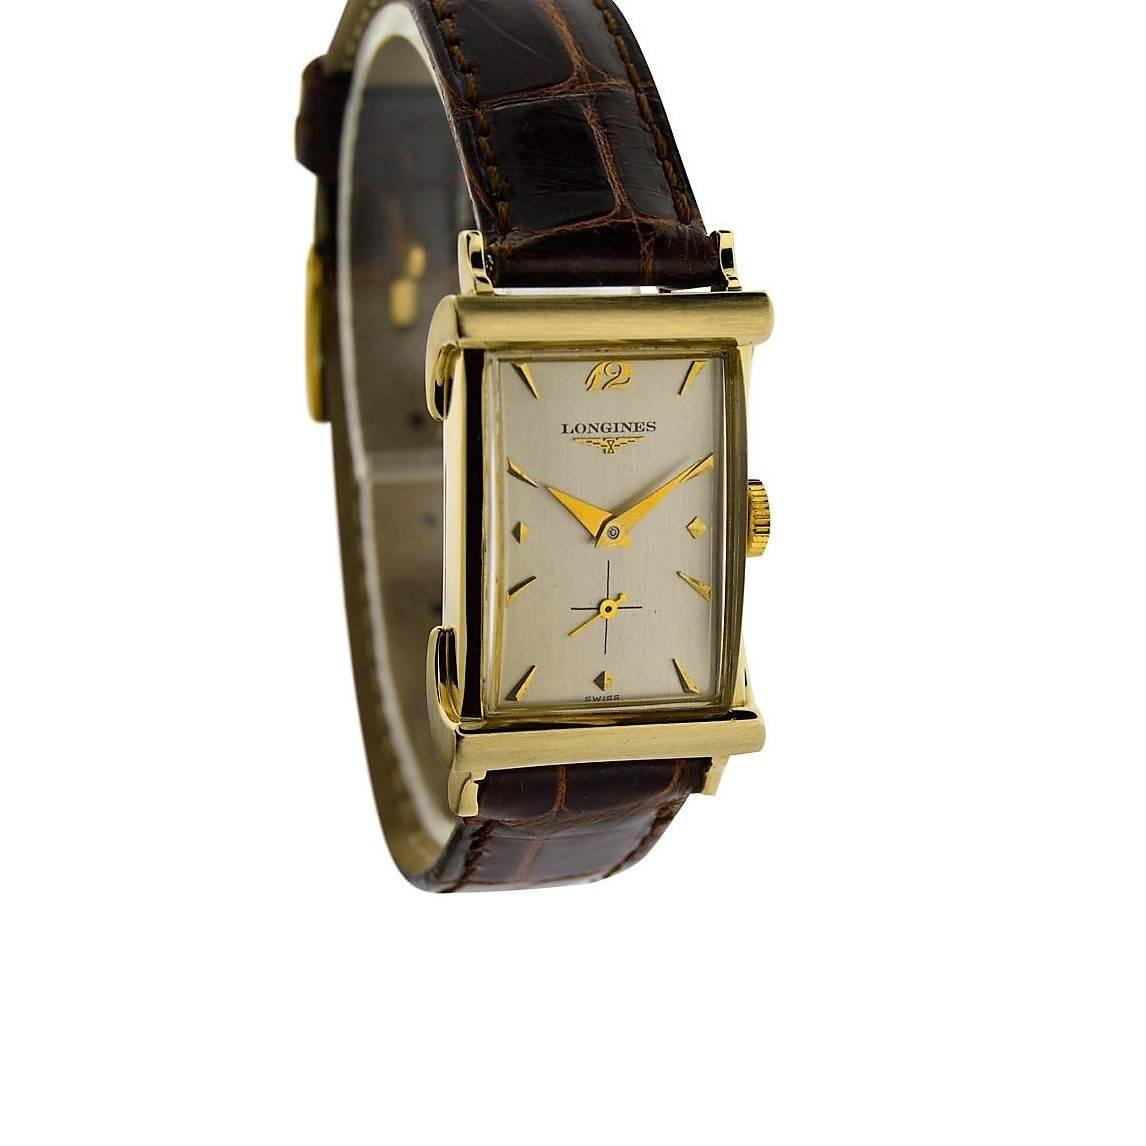 FACTORY / HOUSE: Longines Watch Company
STYLE / REFERENCE: Rectangle / Art Deco
METAL / MATERIAL: 14Kt. Yellow Gold
DIMENSIONS:  39mm  X  22mm
CIRCA: 1940's
MOVEMENT / CALIBER: Manual Winding / 17 Jewels / Cal. 9L
DIAL / HANDS: Gold Applied Numbers